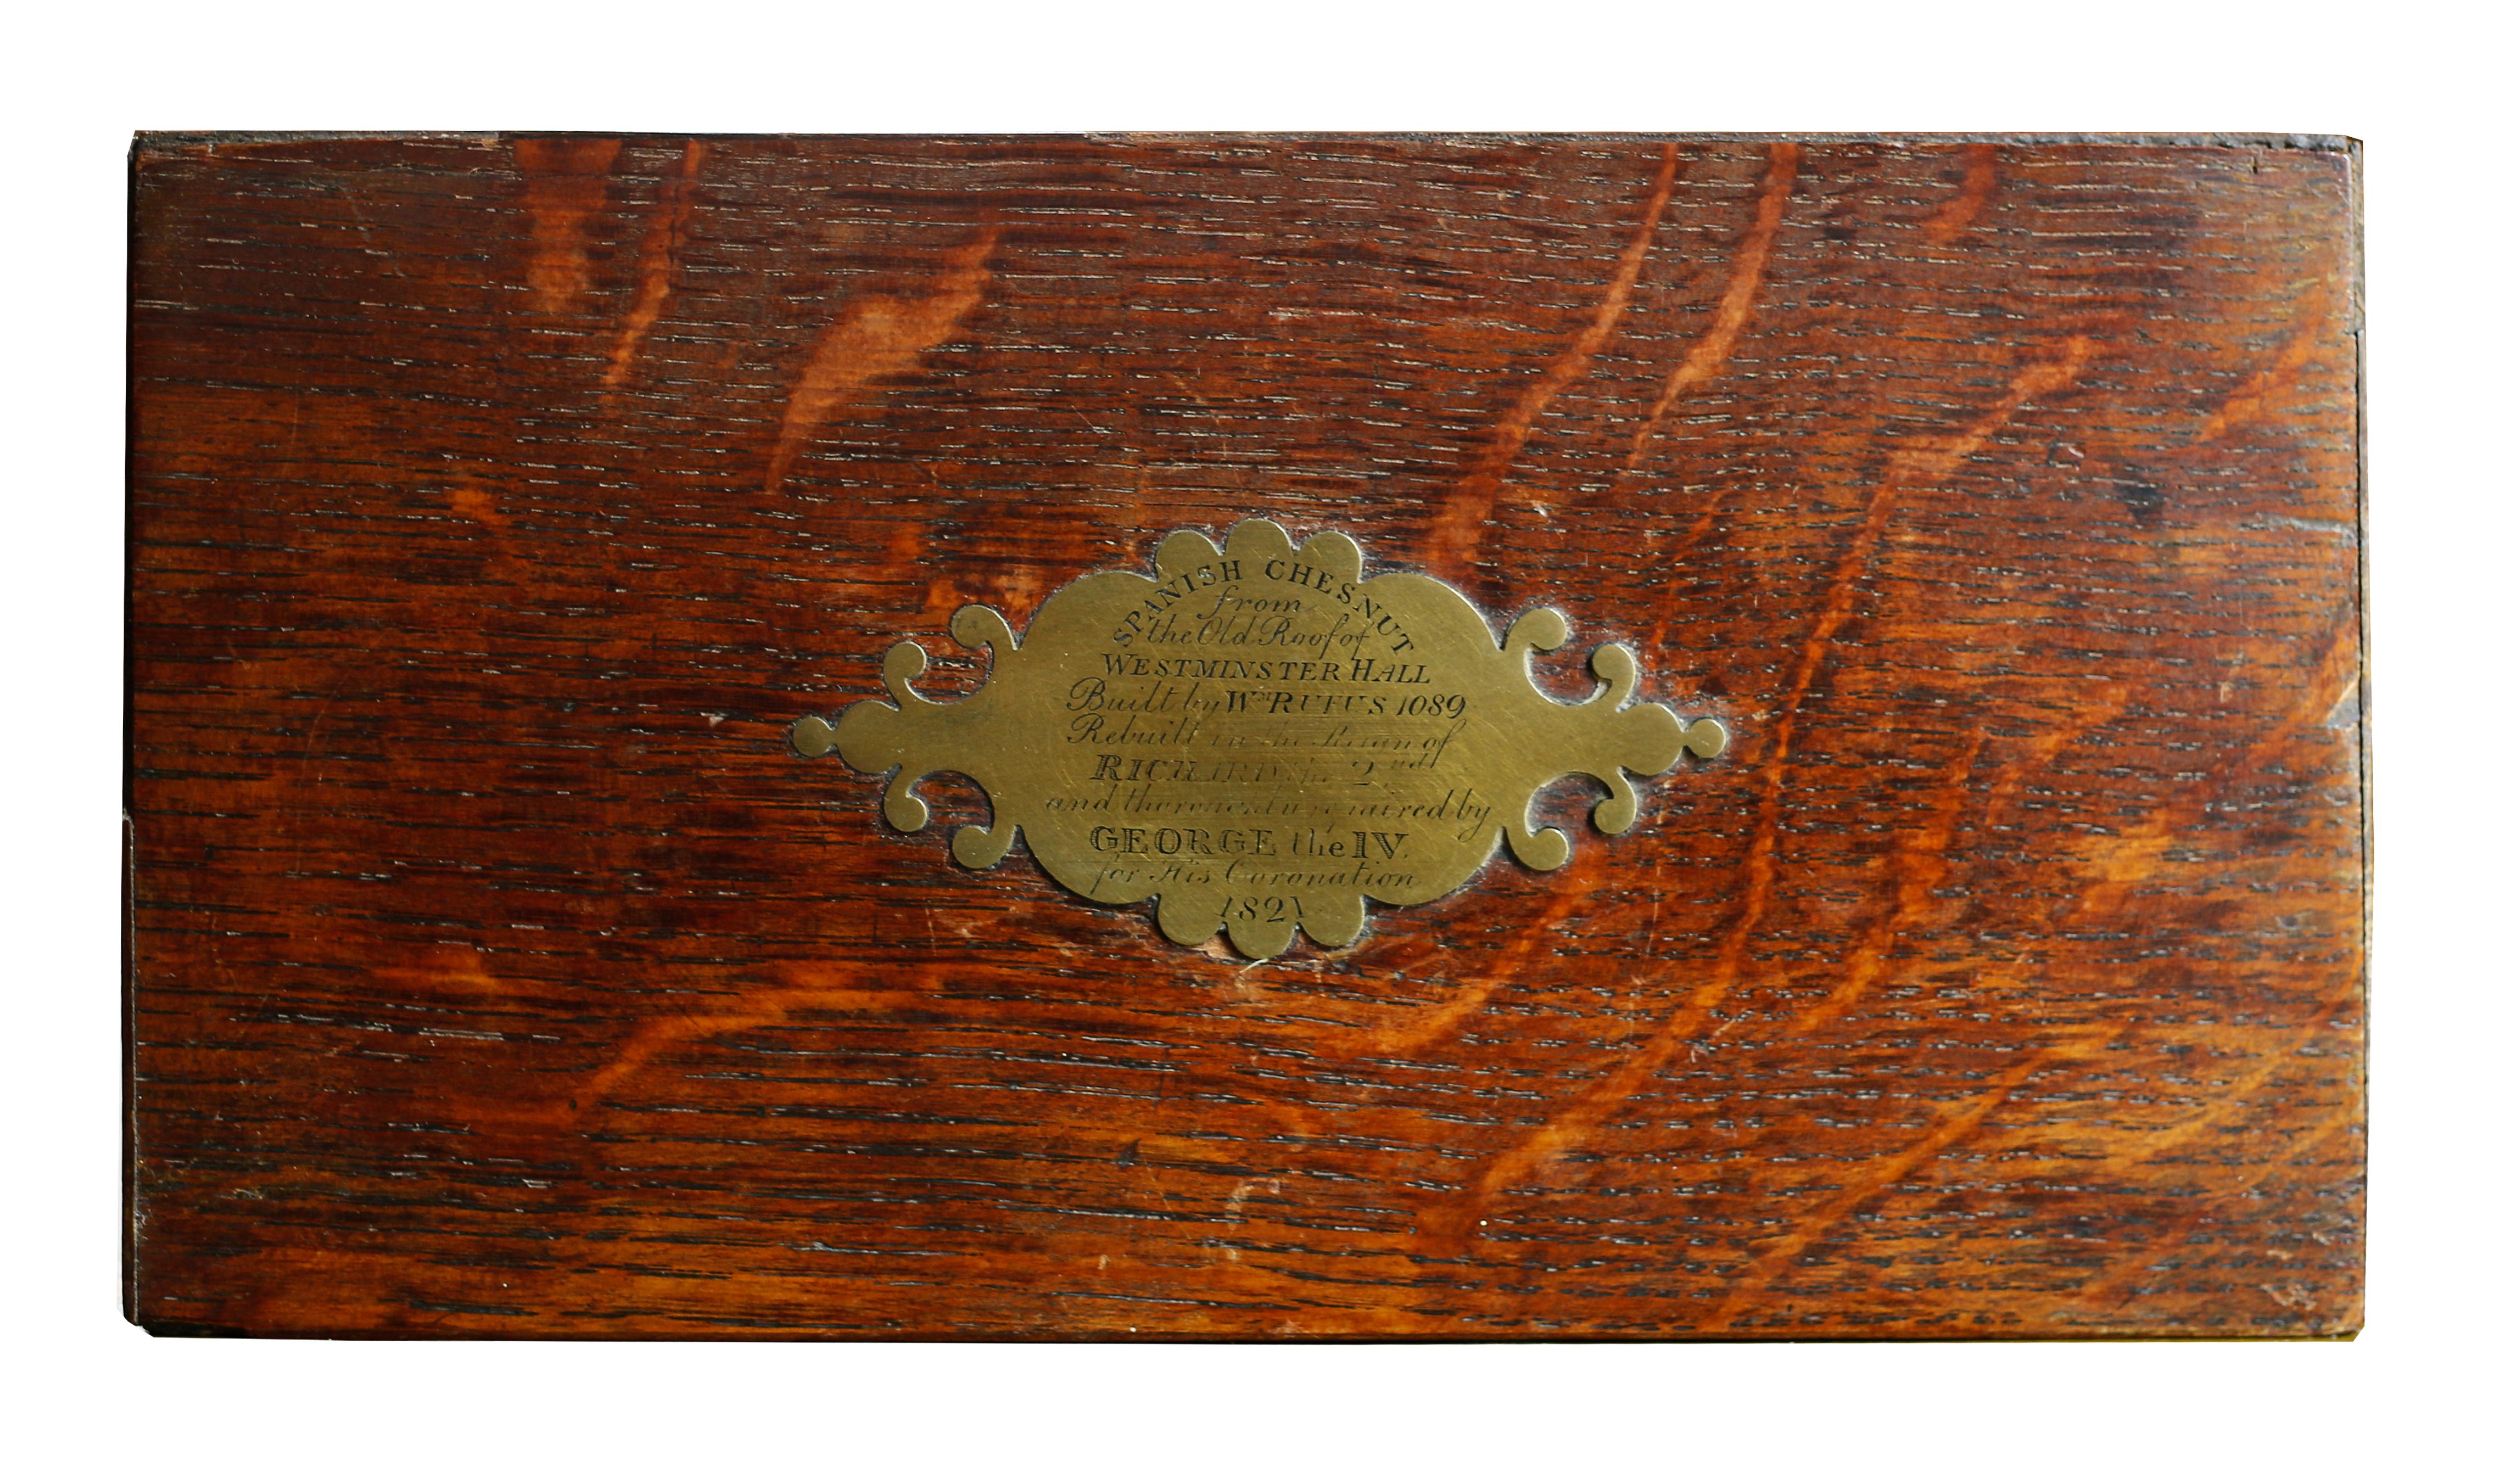 English 19th Century Regency Tea Caddy from Westminster Hall Roof